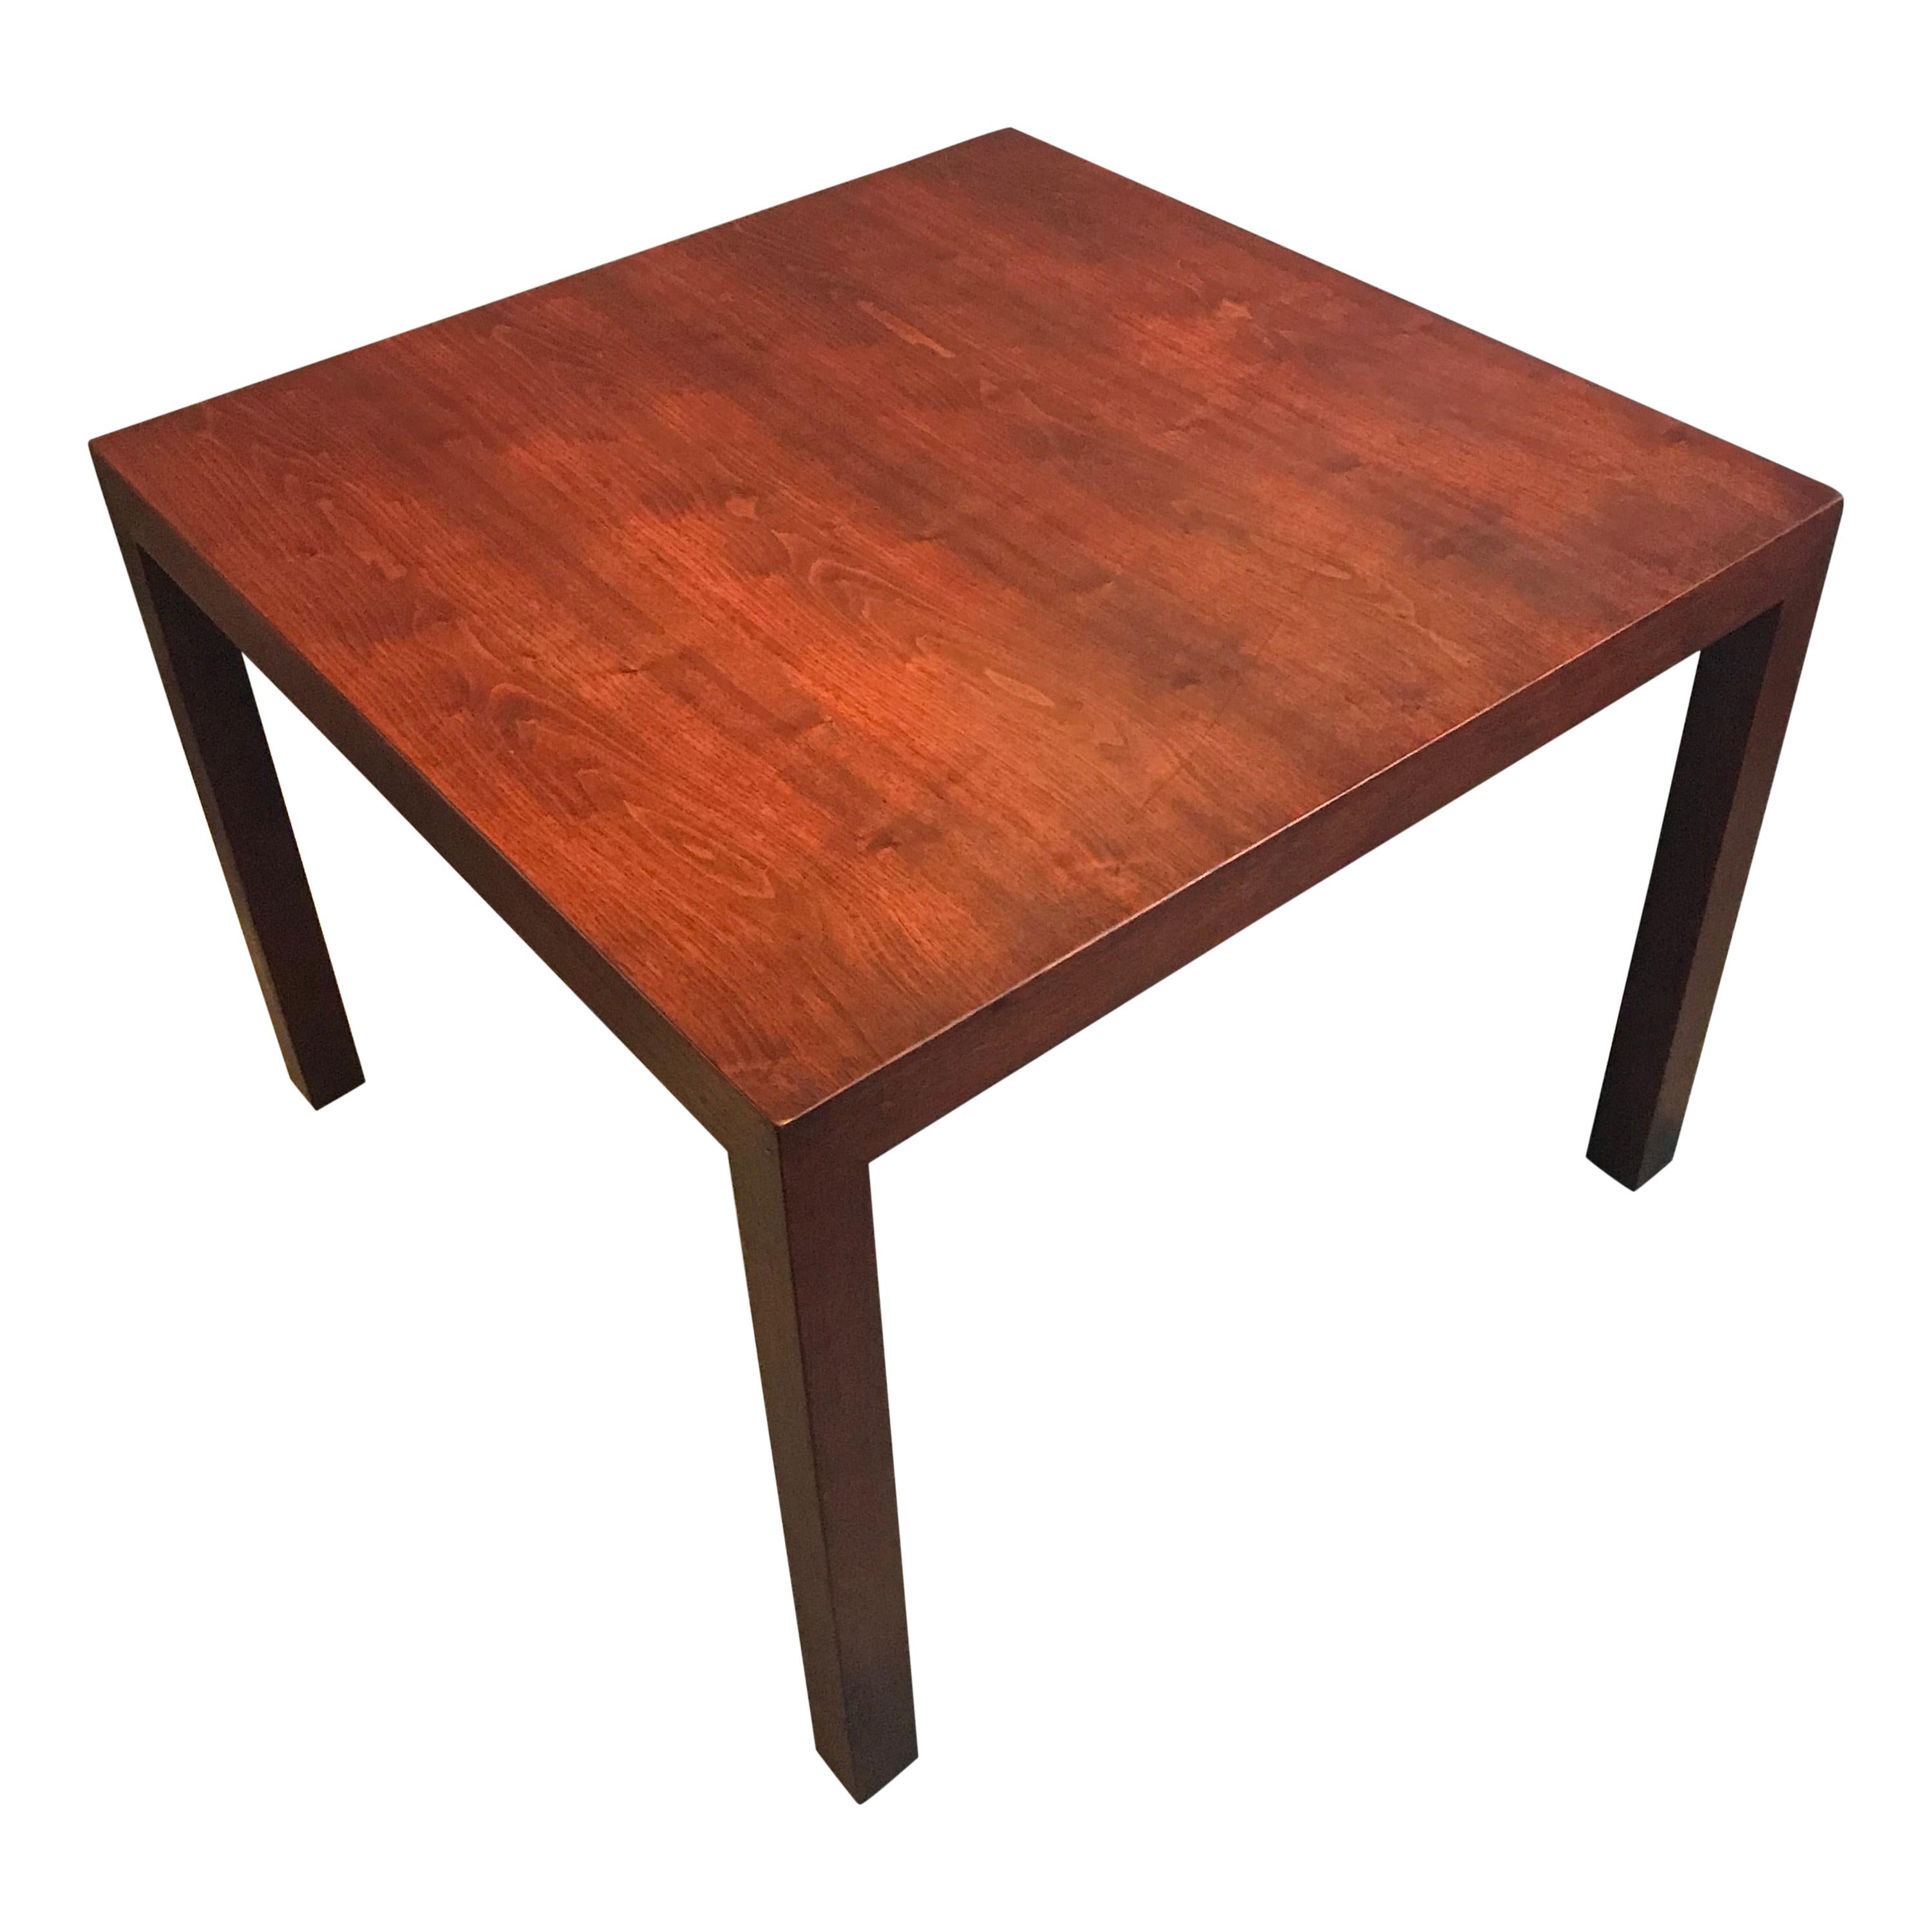 Edward Wormley Parsons Style Side or End Table for Dunbar